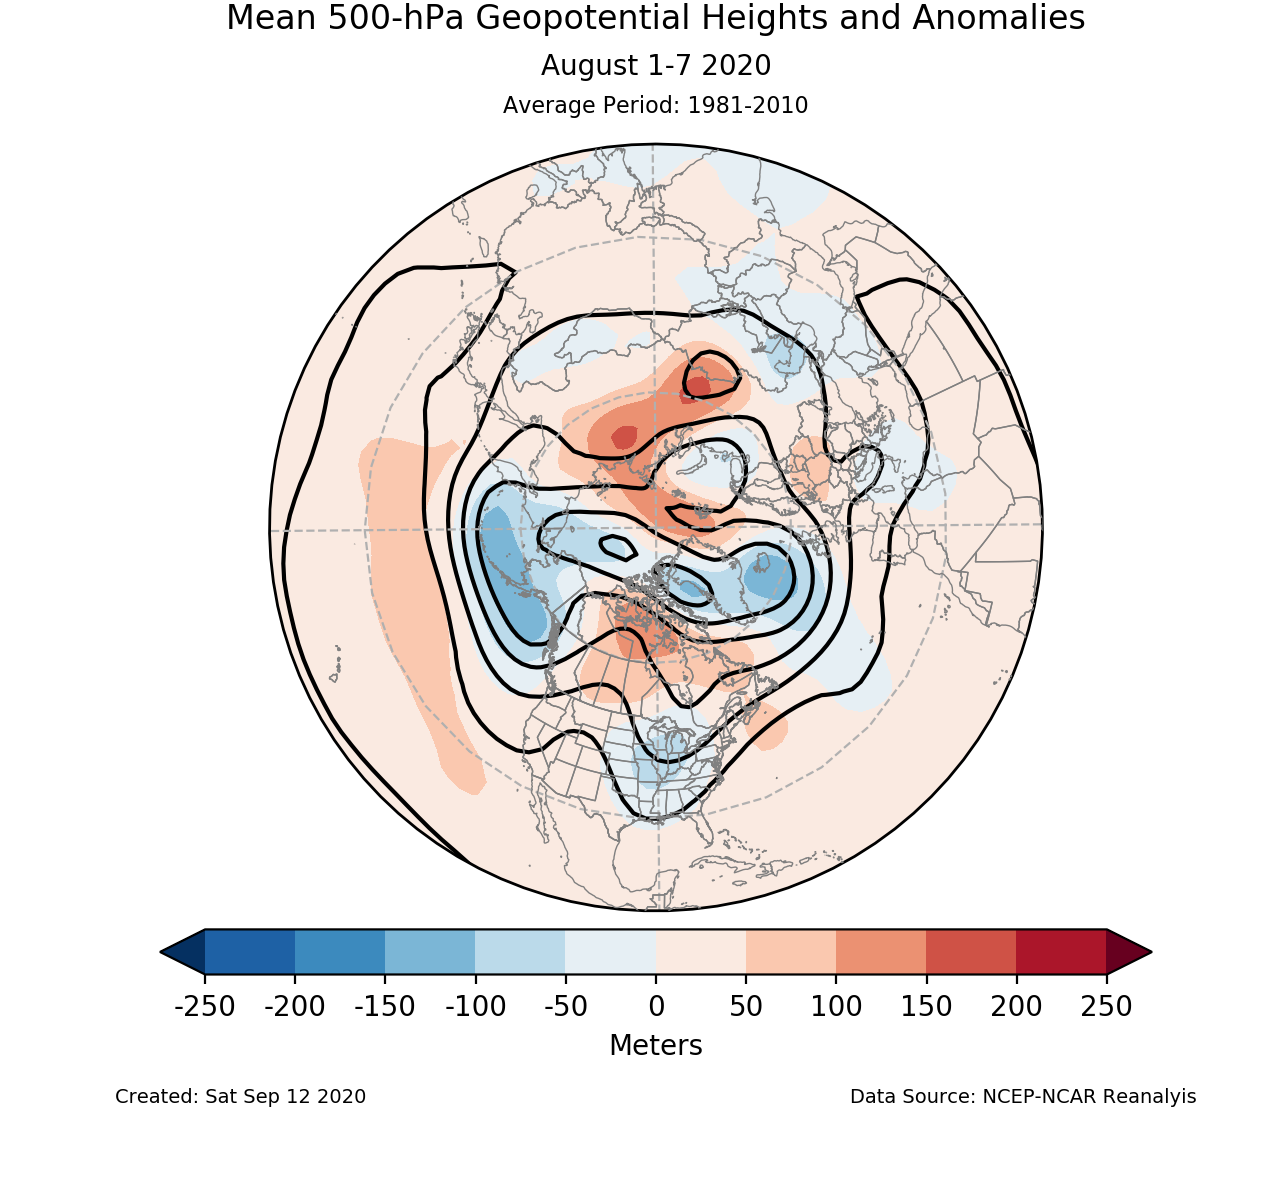 500-mb height mean (contours) and anomalies (shading) for the Northern Hemisphere for August 1-7 2020